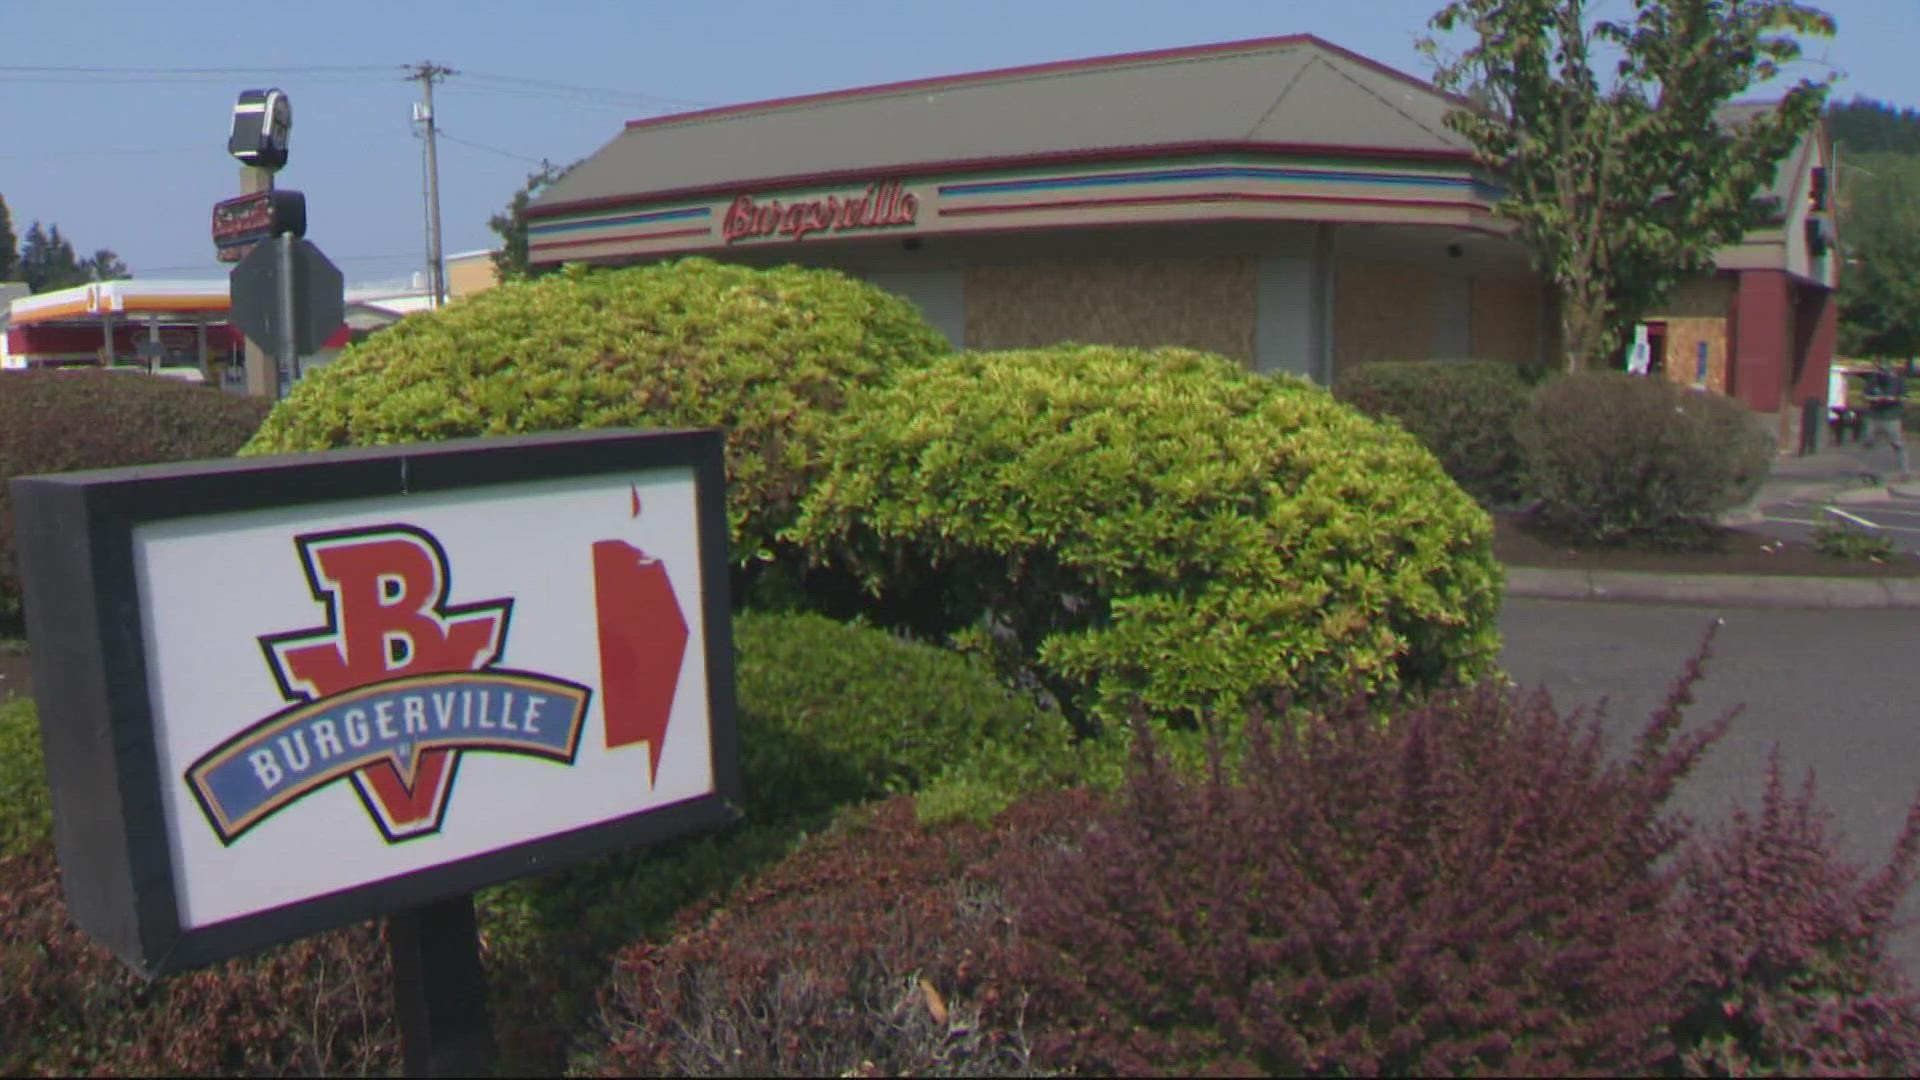 Burgerville's CEO cited deteriorating conditions in the surrounding area as a reason for the closure.